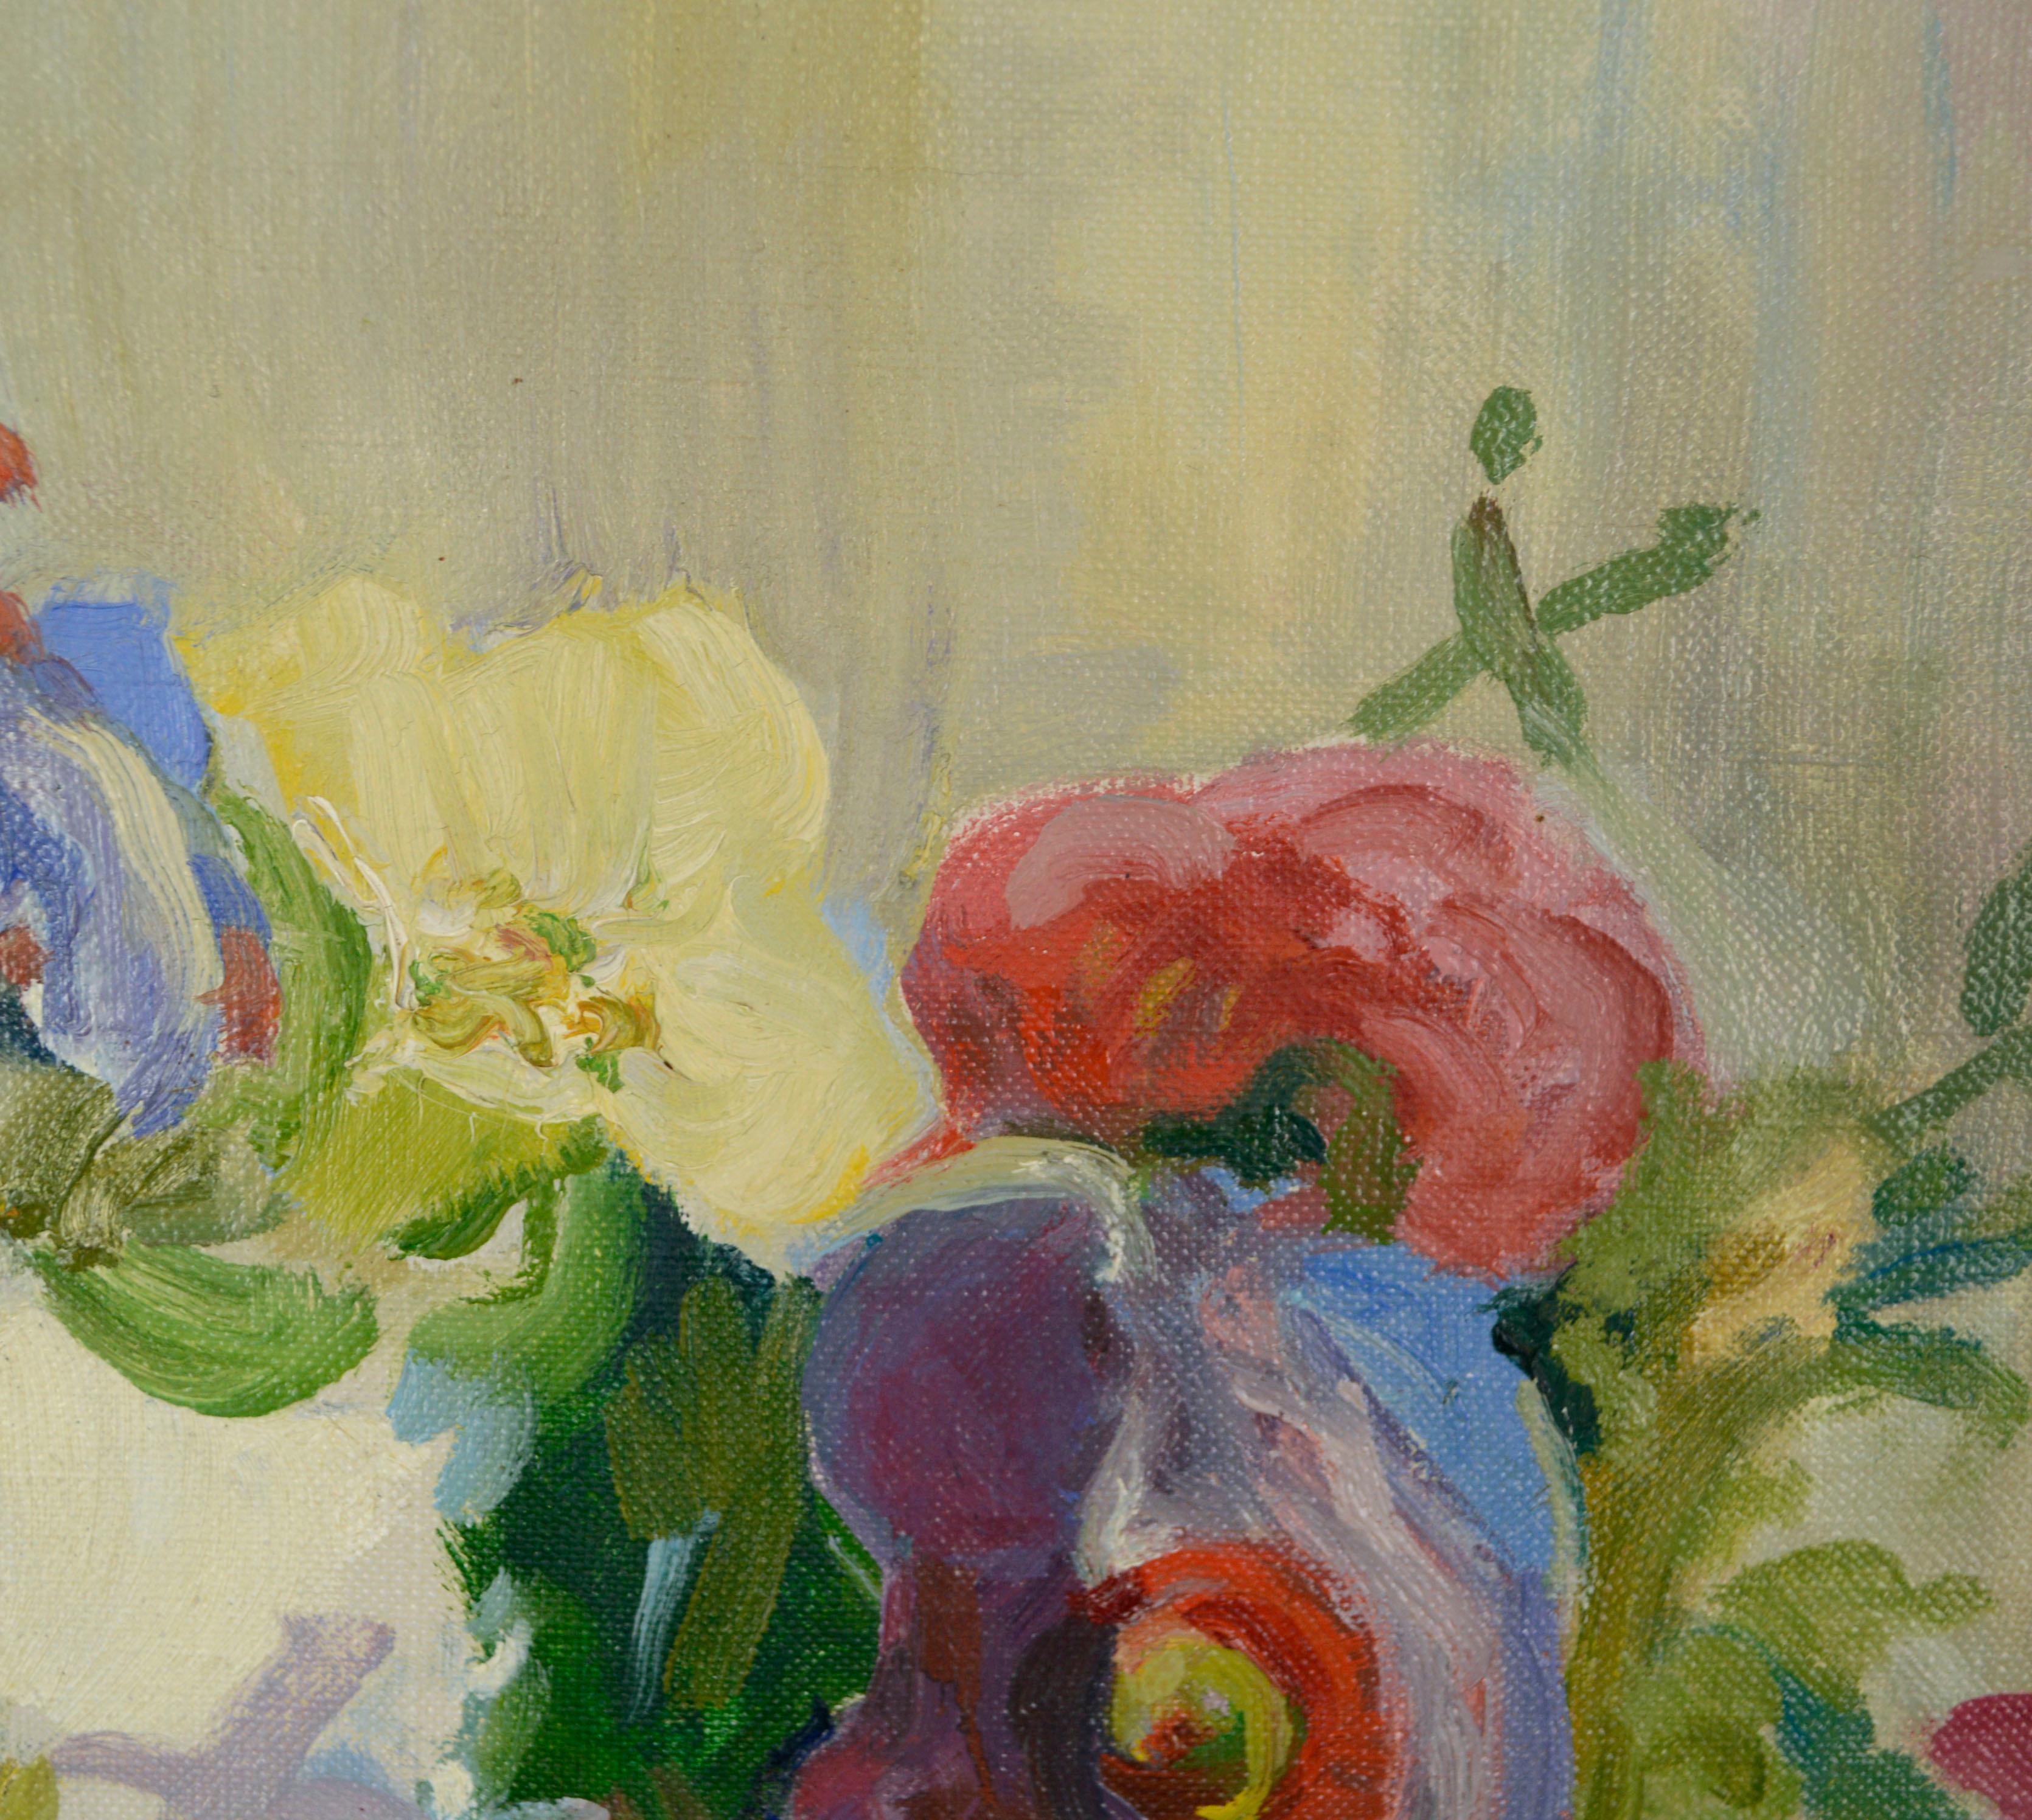 A lush spring bouquet bursts forth with a bounty of beautiful, vibrant flowers in bloom in this mid century floral still-life by Helen Gapen Oehler (American, 1893-1979). Signed 